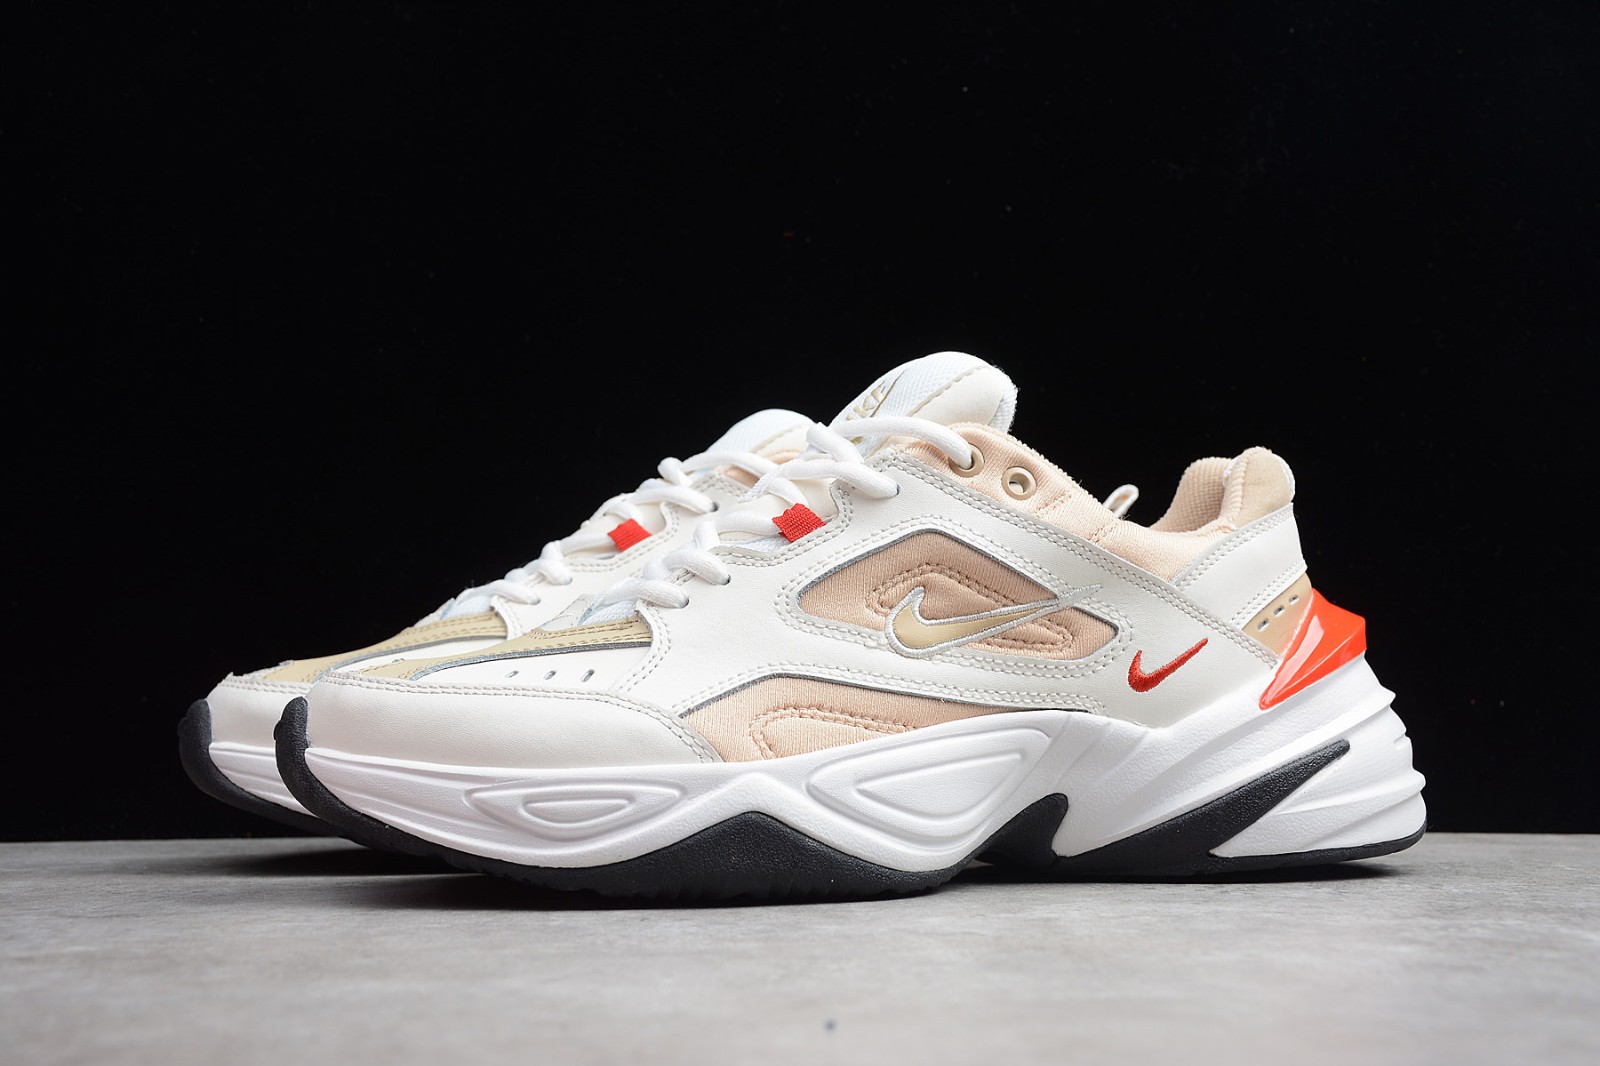 sent Which one R StclaircomoShops - Bershka sneakers with embossed print in black - Nike M2K  Tekno Sail Habanero Red Daddy Shoes Chunky Sneakers AV4789 - 102